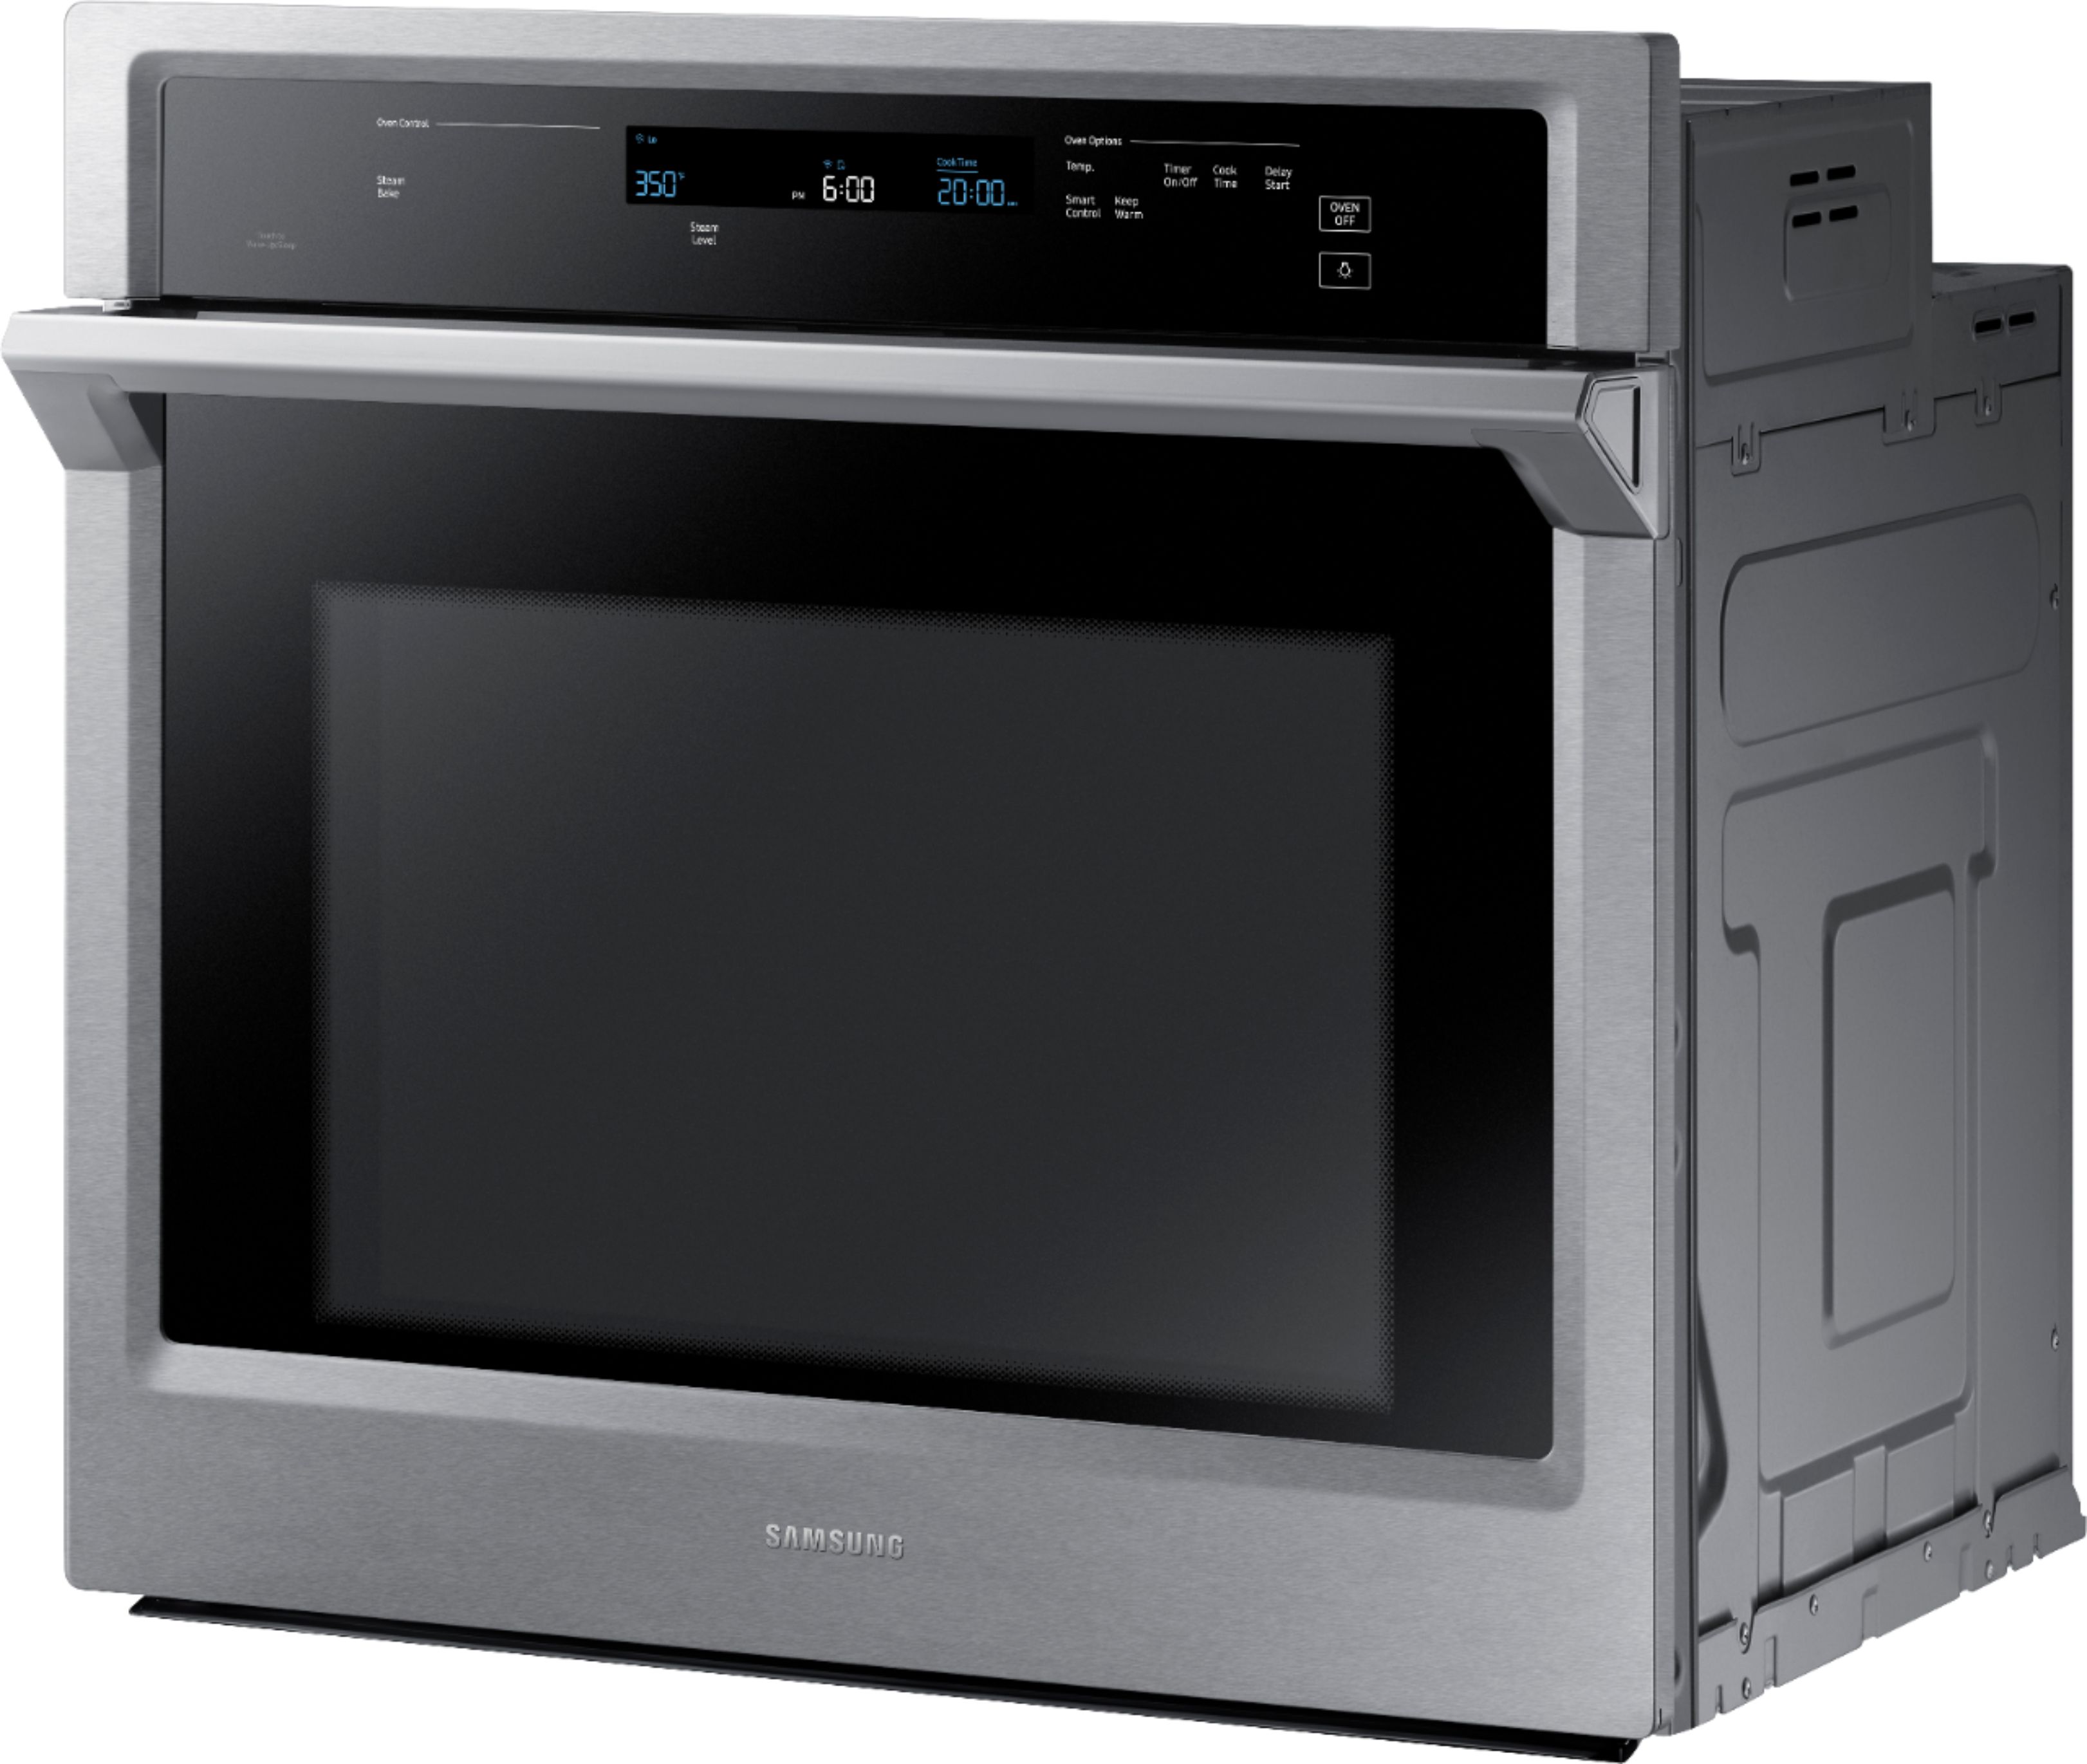 Samsung Microwave Oven Recipes Videos